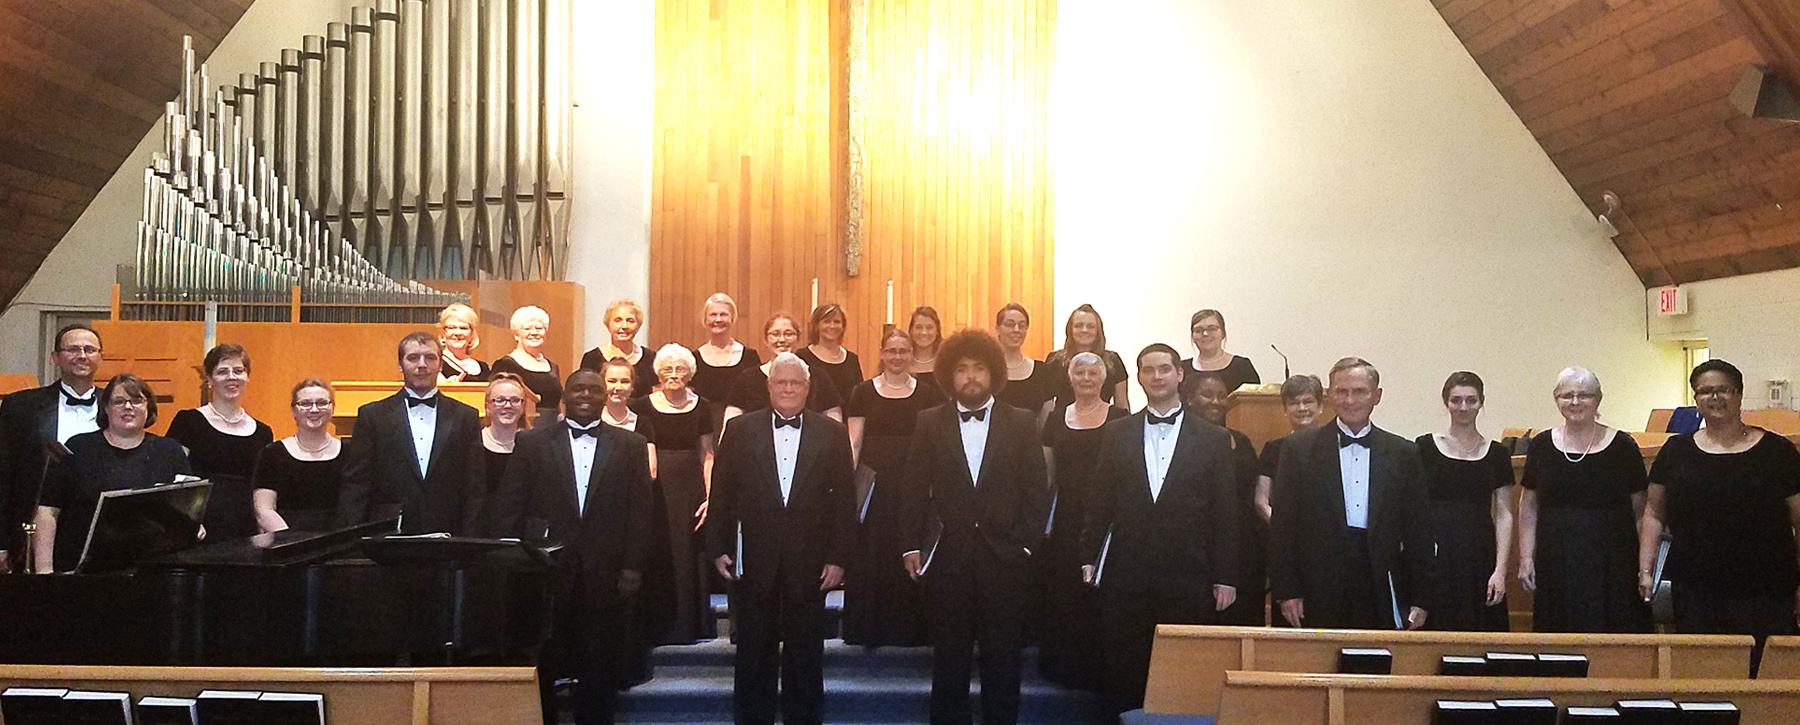 Thirty individuals standing together at the front of a church in black choir dress.